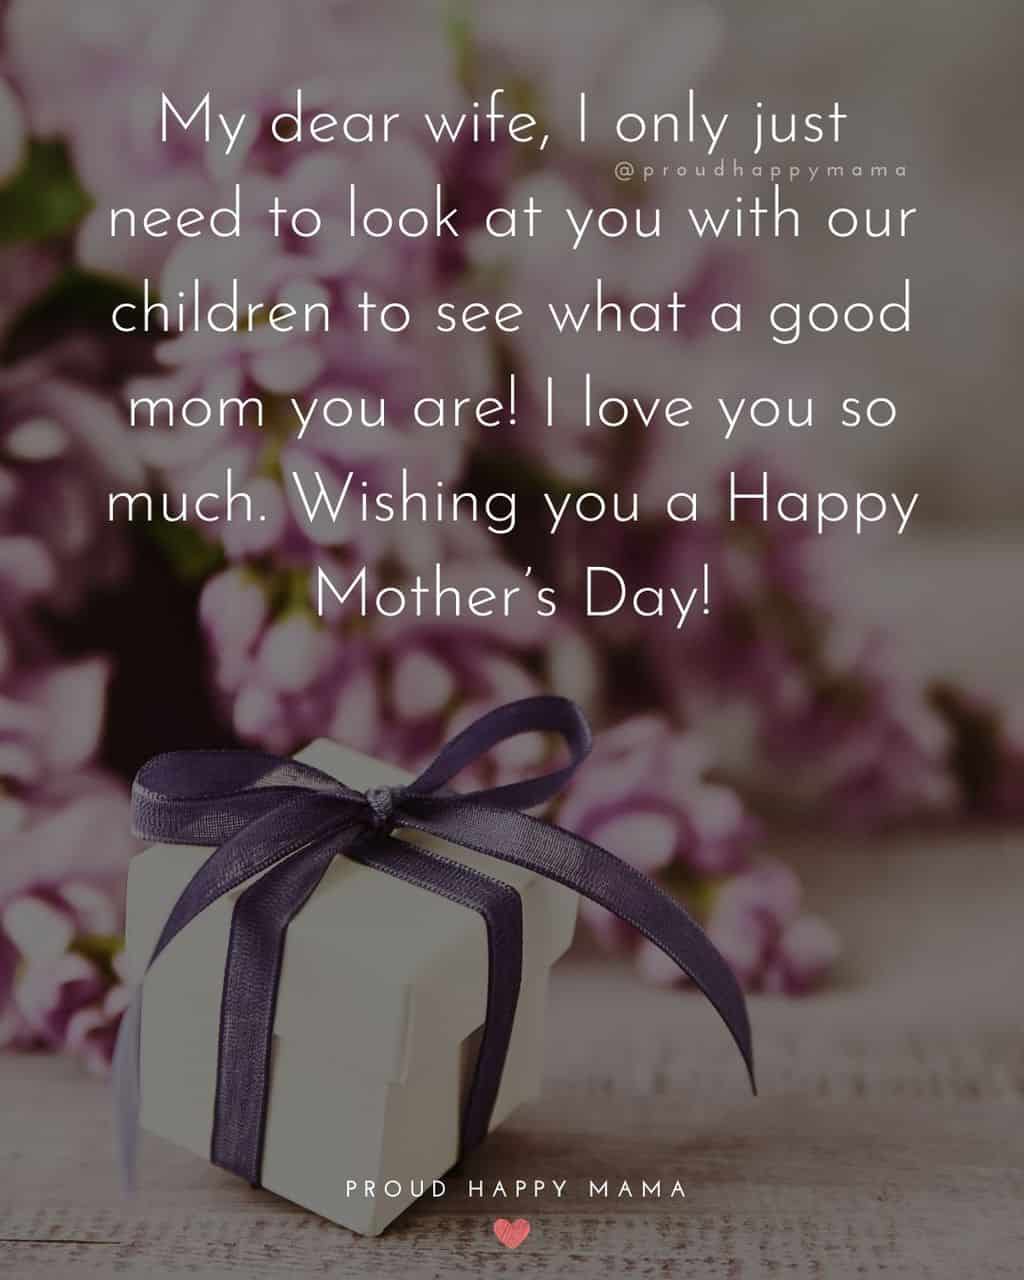 Happy Mothers Day Quotes For Wife - My dear wife, I only just need to look at you with our children to see what a good mom